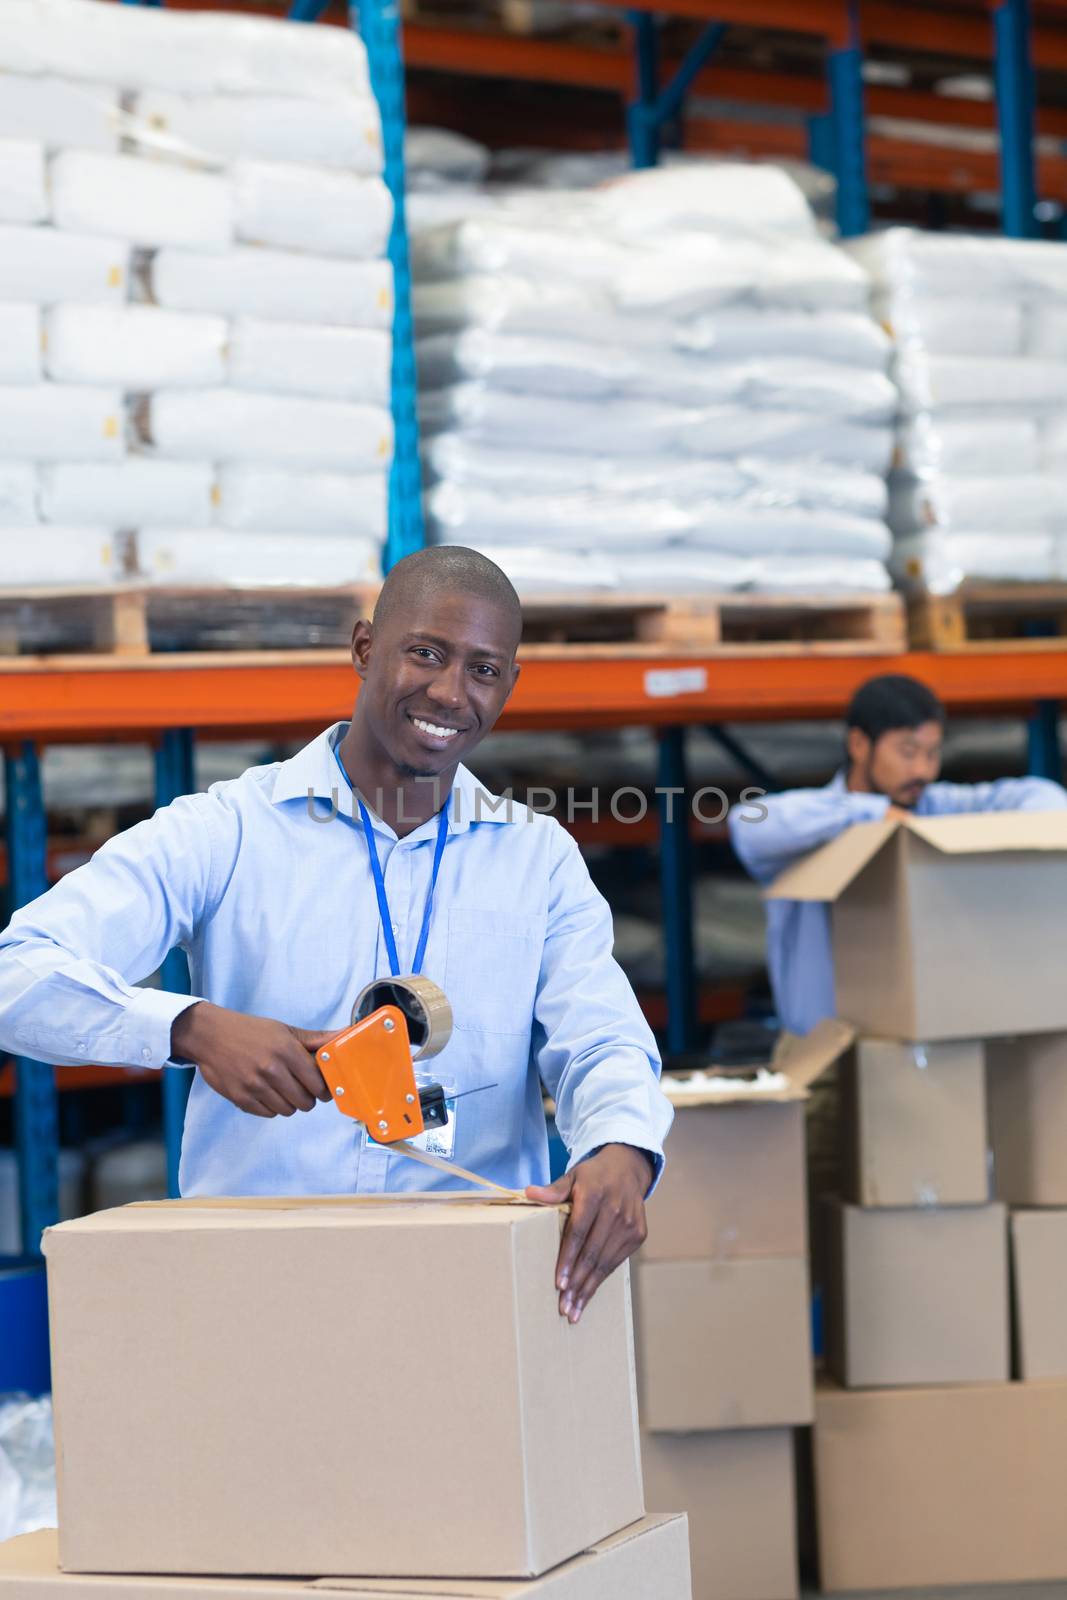 Portrait close-up of happy mature African-american male staff packing cardboard box with tape gun dispenser in warehouse. Asian male worker is unpacking cardboard box in the background. This is a freight transportation and distribution warehouse. Industrial and industrial workers concept